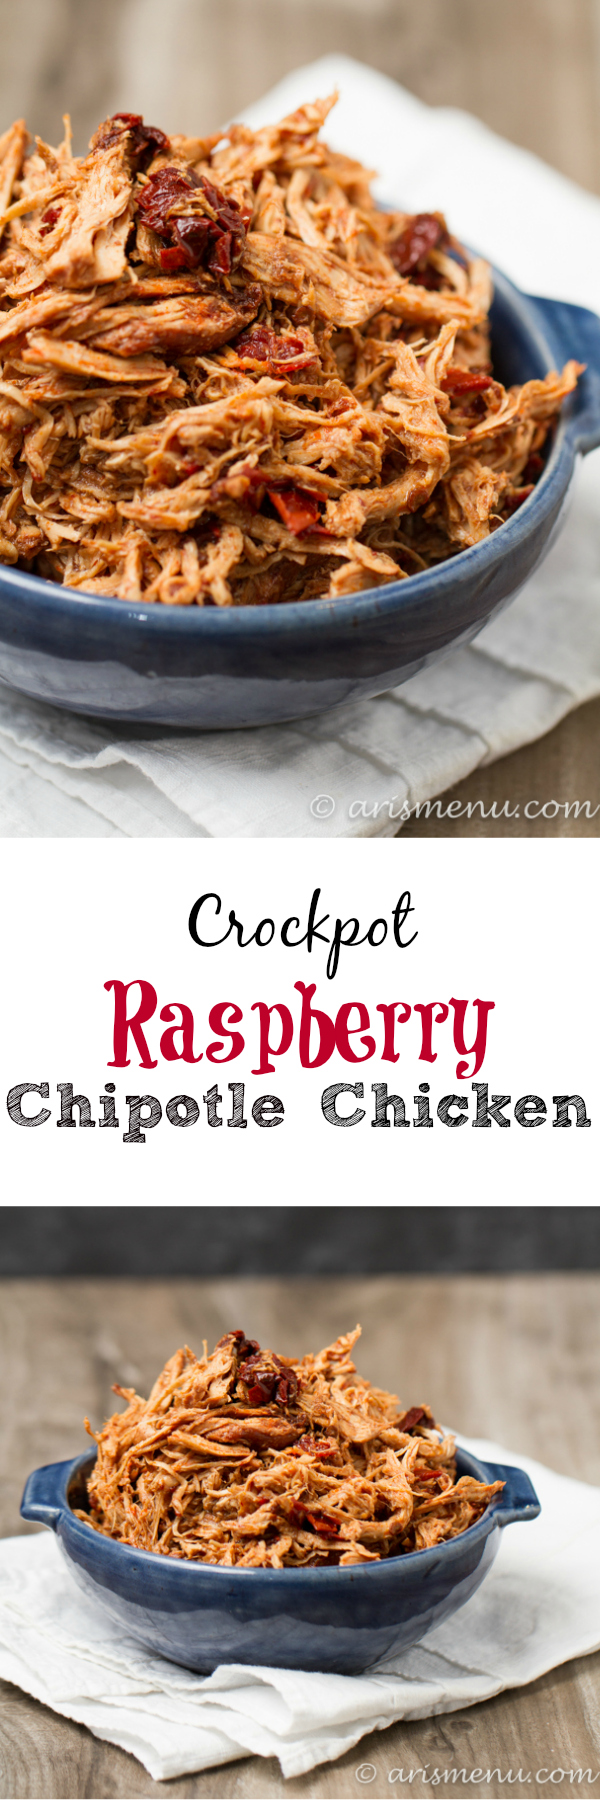 Crockpot Raspberry Chipotle Chicken: Perfectly tender and juicy shredded chicken with a sweet and spicy kick!